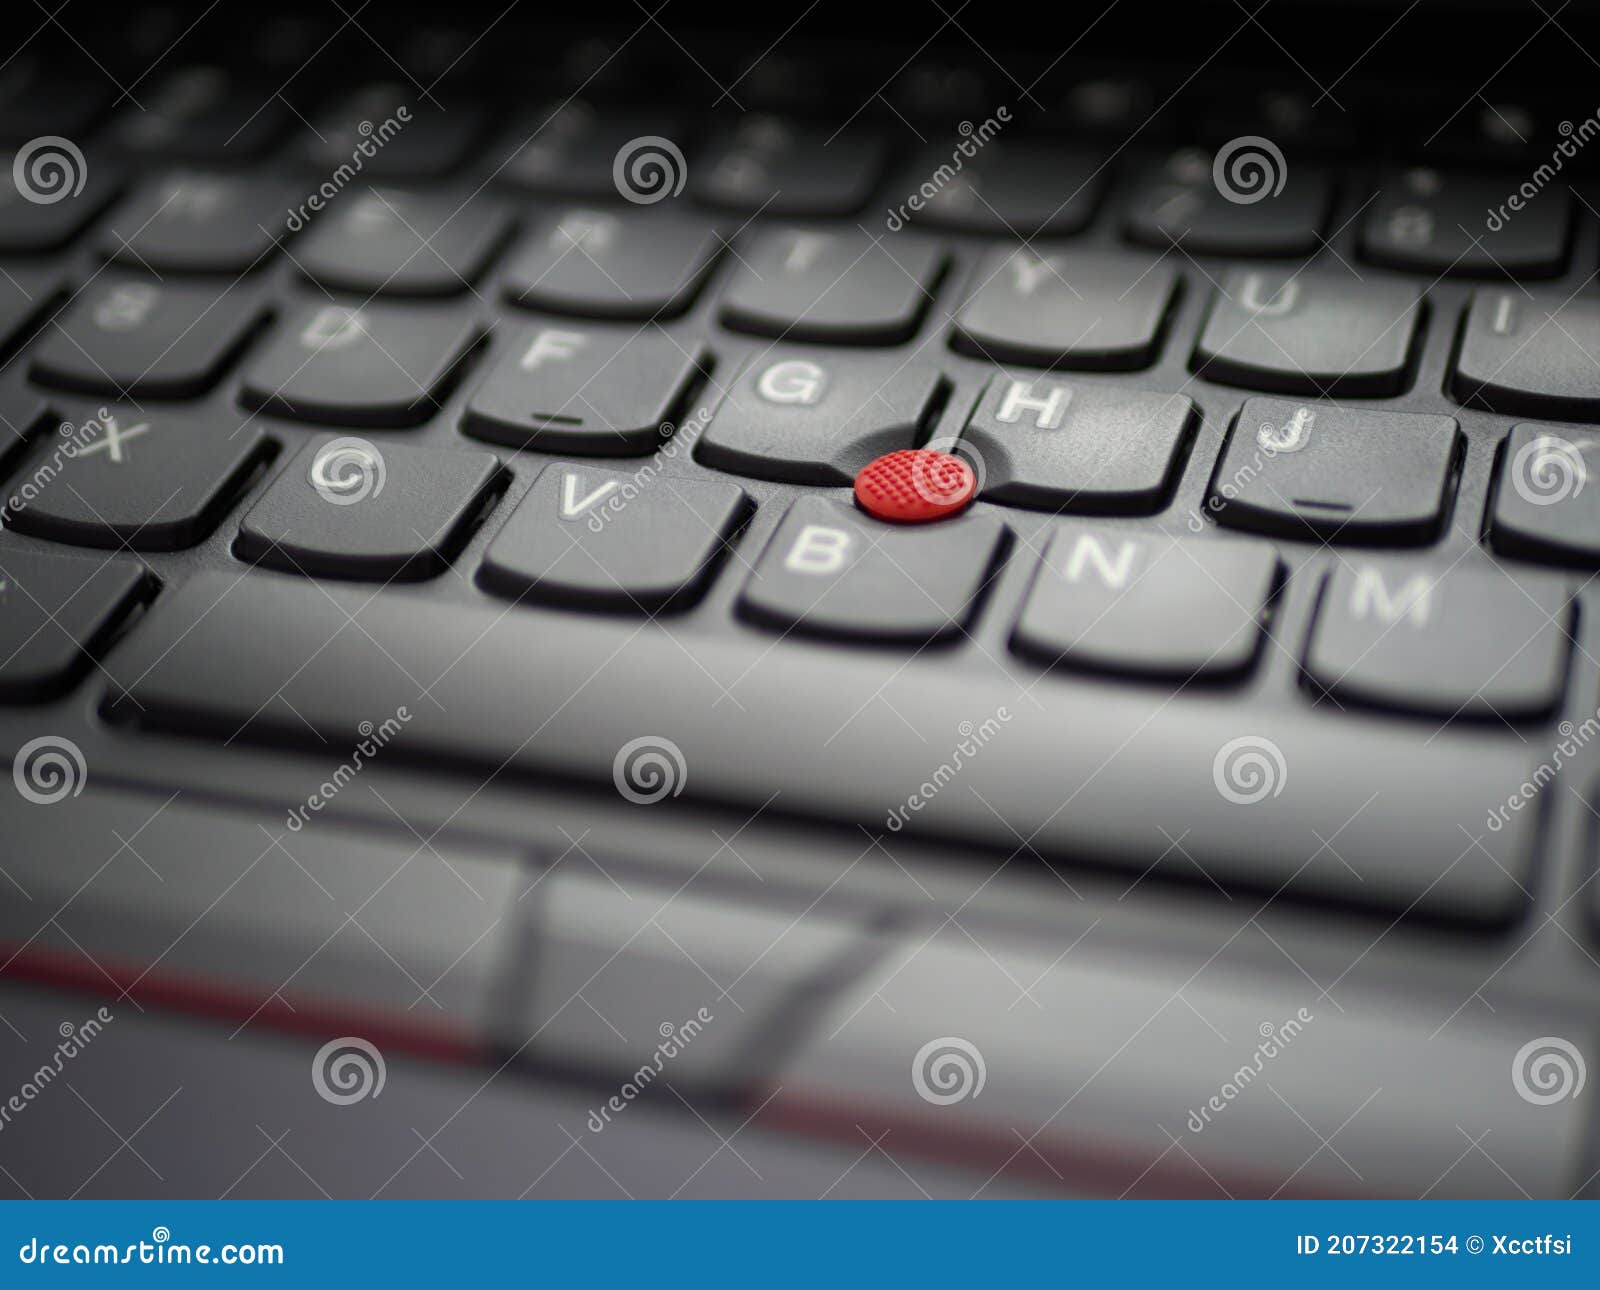 ThinkPad with Red Touch Point Stock Photo - of perilous: 207322154